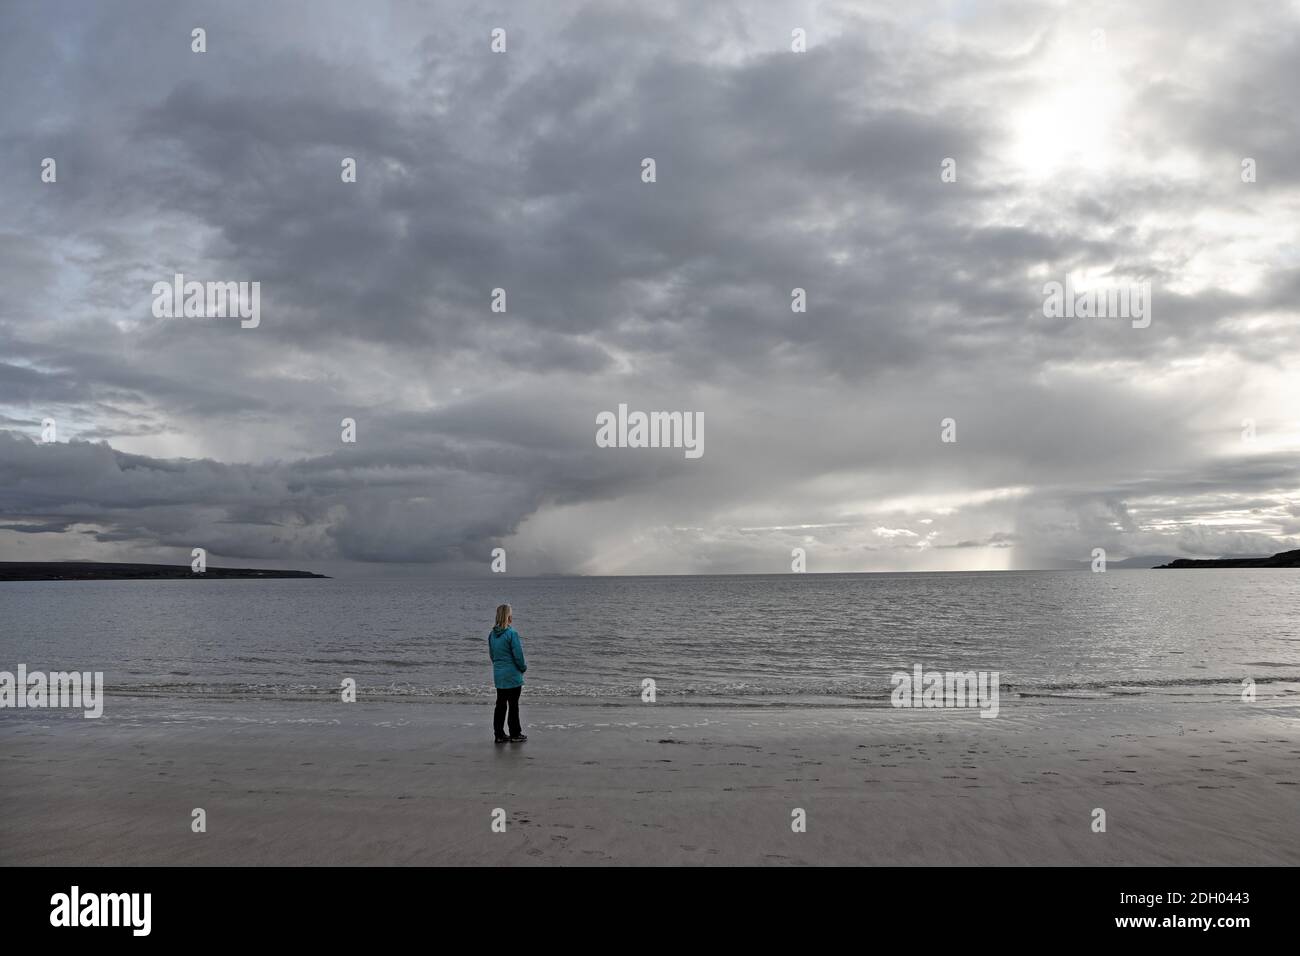 Woman on a Deserted Beach Looking Towards Clearing Storm Clouds on the Horizon, Sands Bay, Gairloch, Scotland, UK Stock Photo